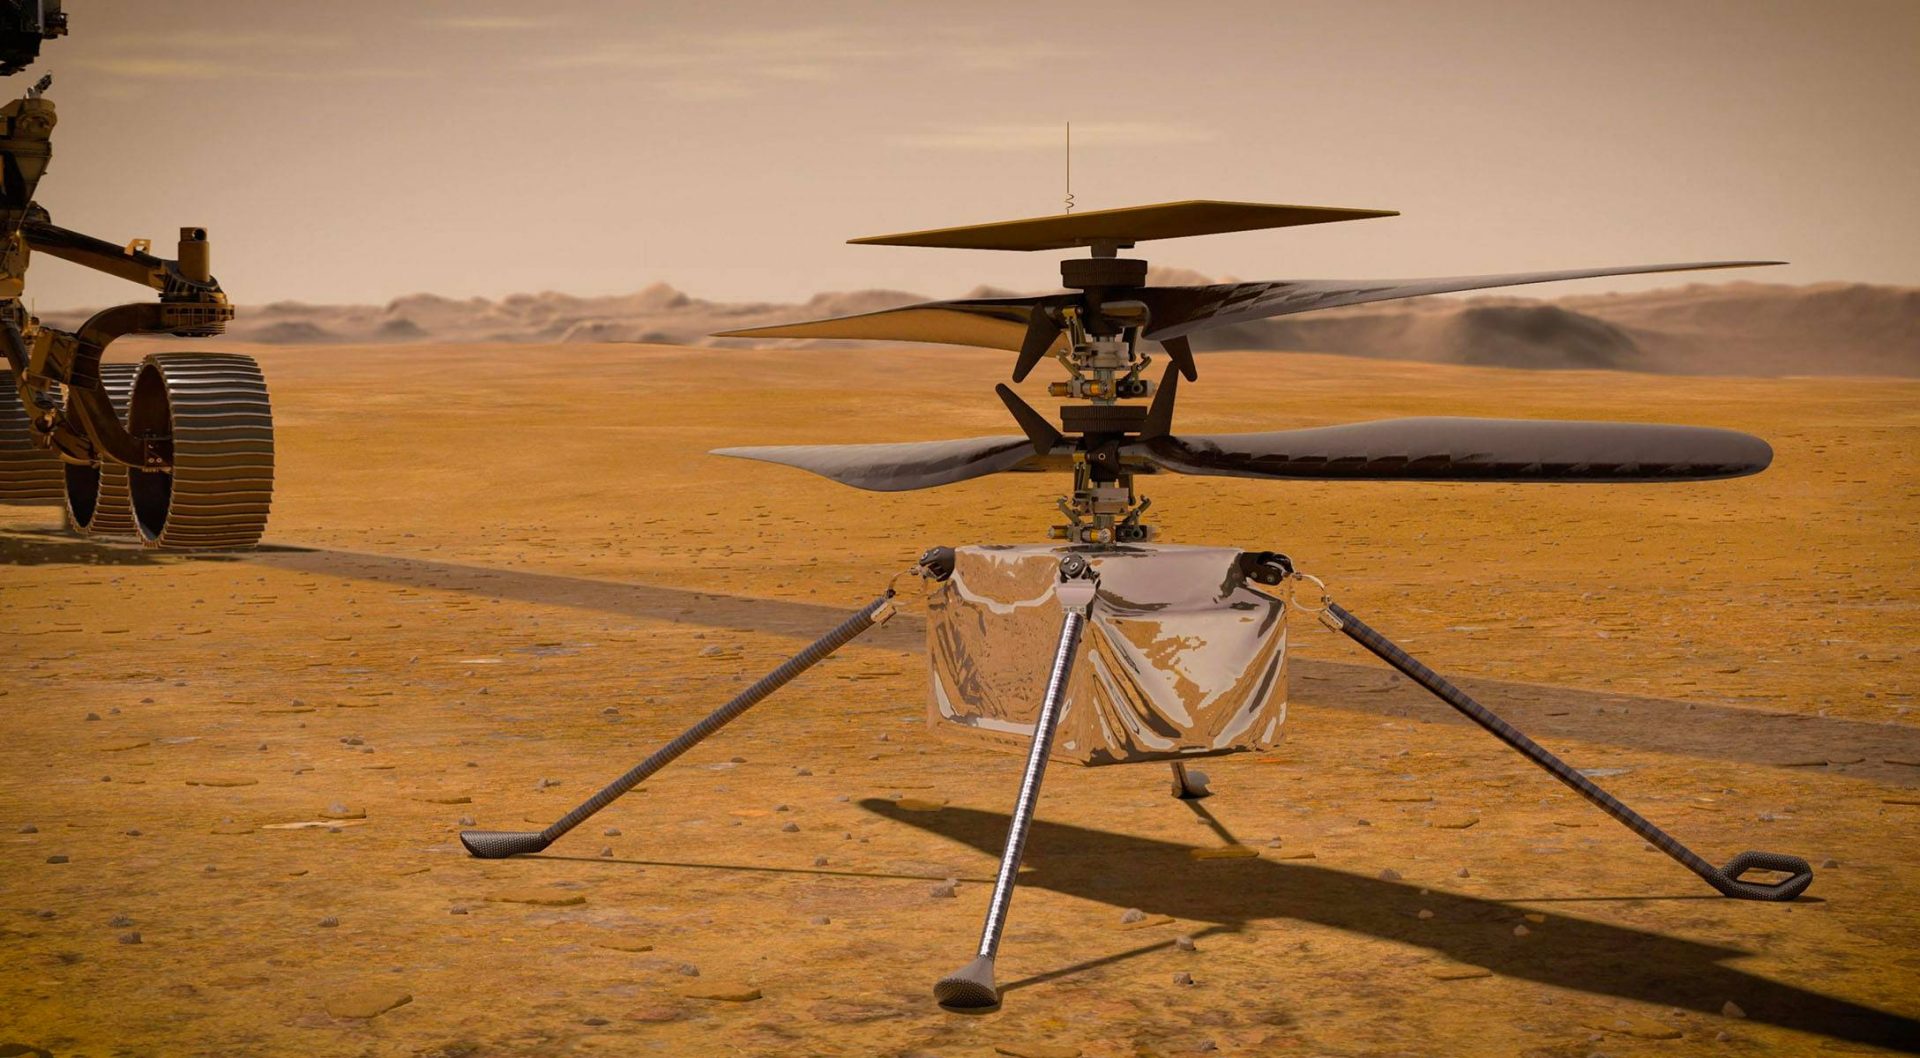 A section of the Wright brothers’ first plane is now on Mars